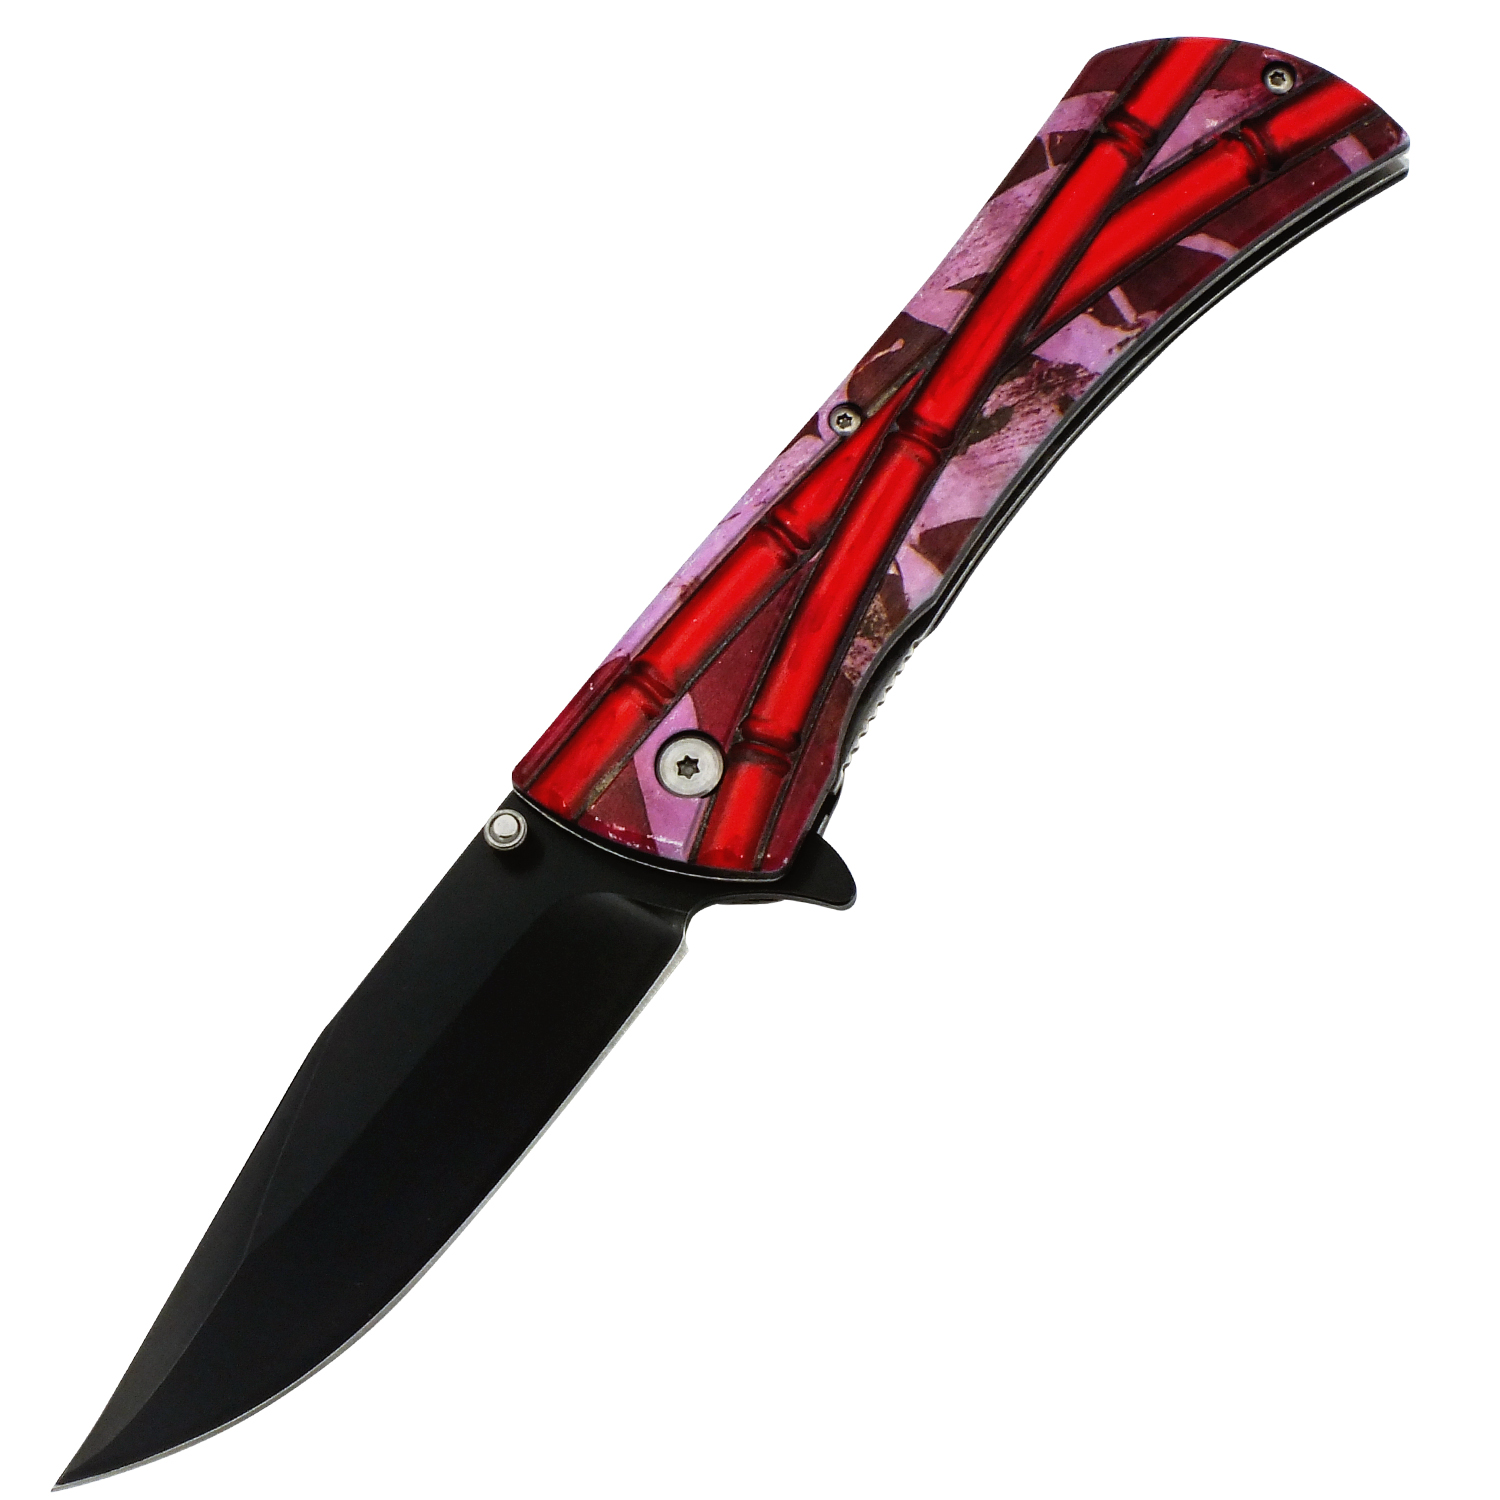 Bamboo Dream Red Spring Assisted Folding Knife